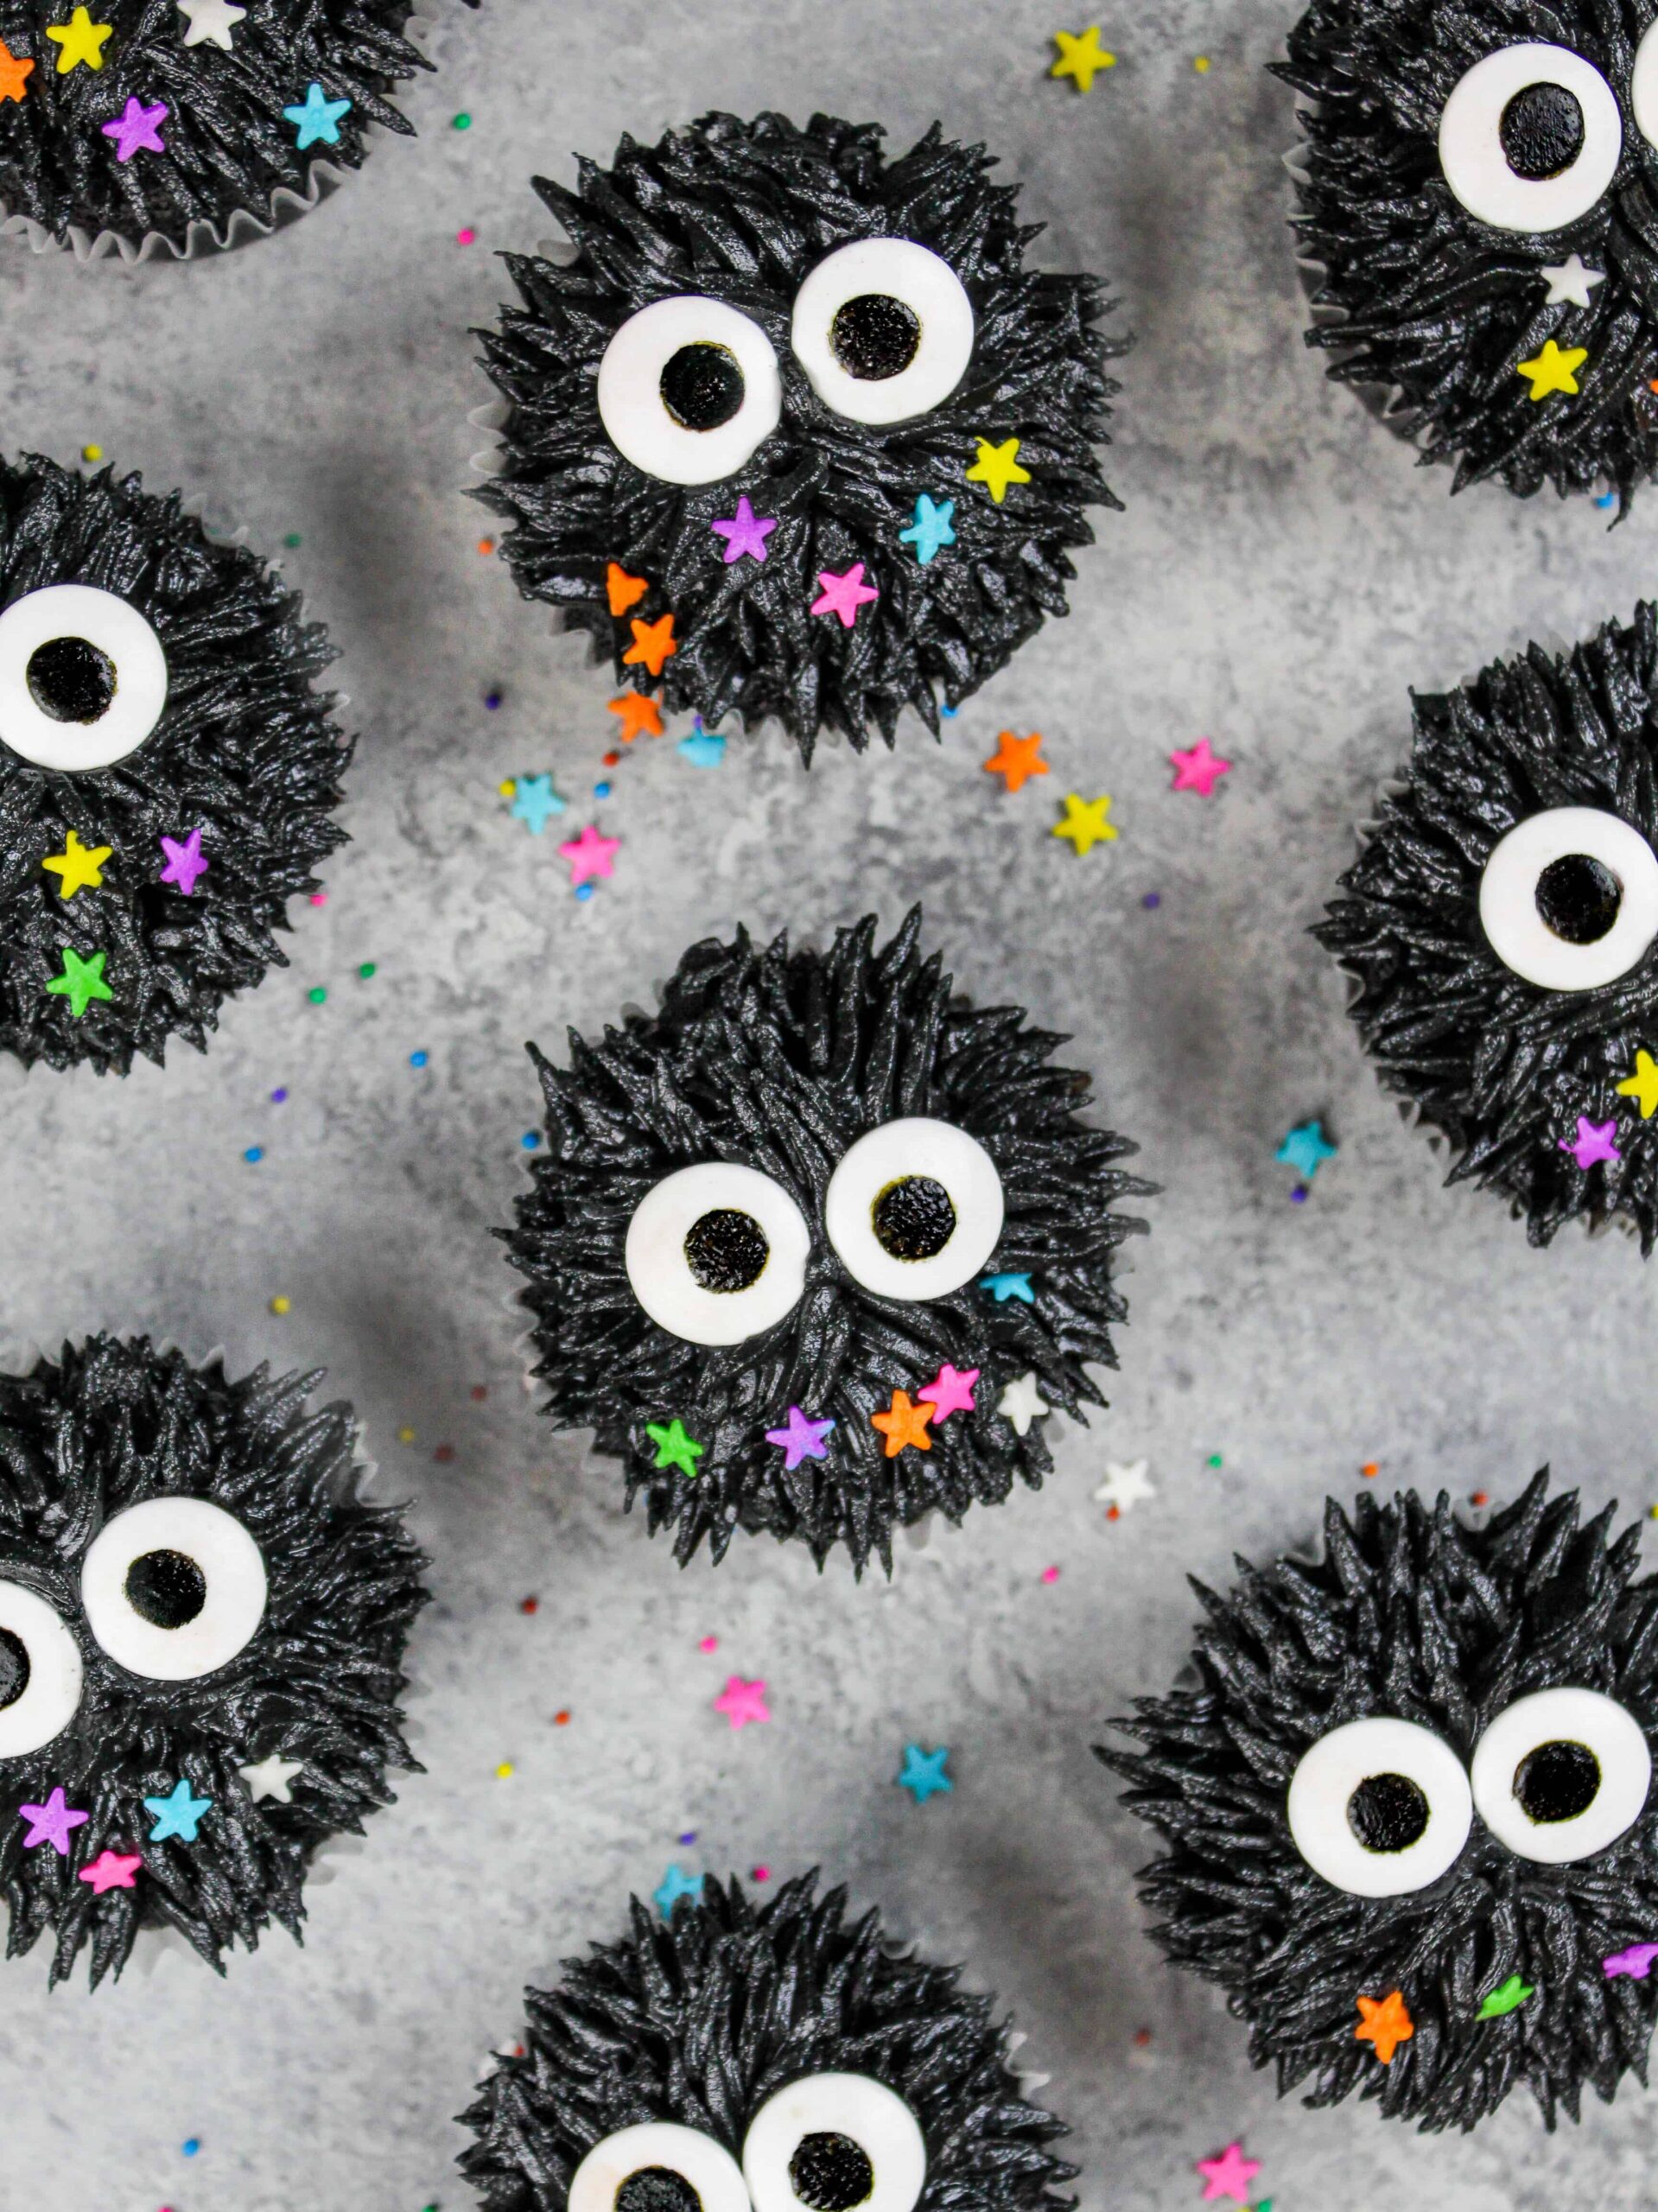 Soot Sprite Cupcakes: Easy Recipe & Tutorial - Chelsweets